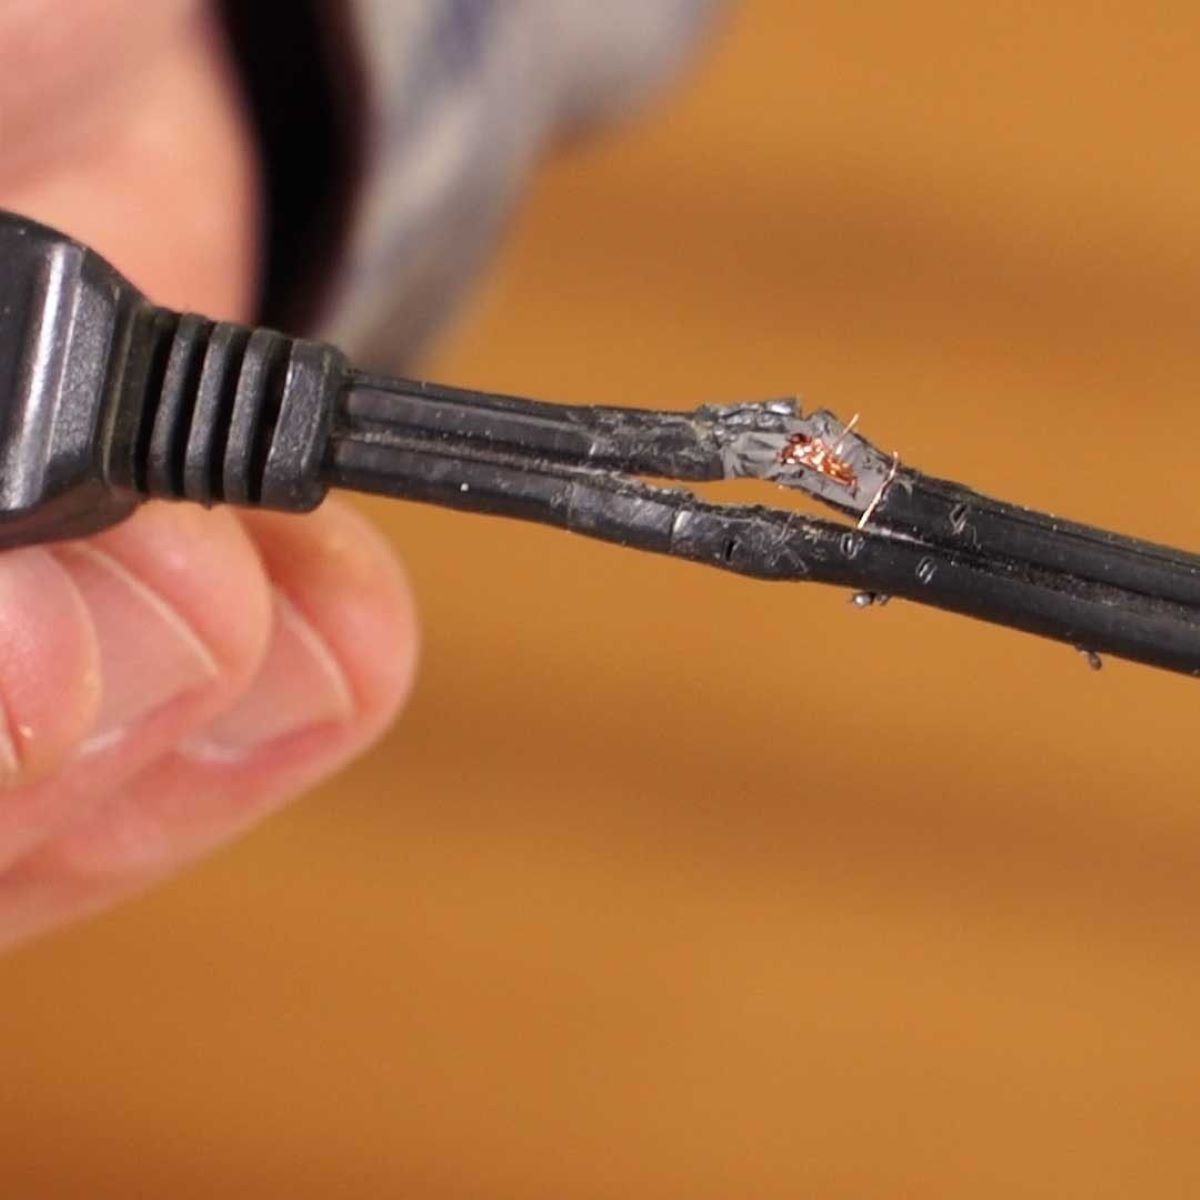 How To Fix An Electrical Cord